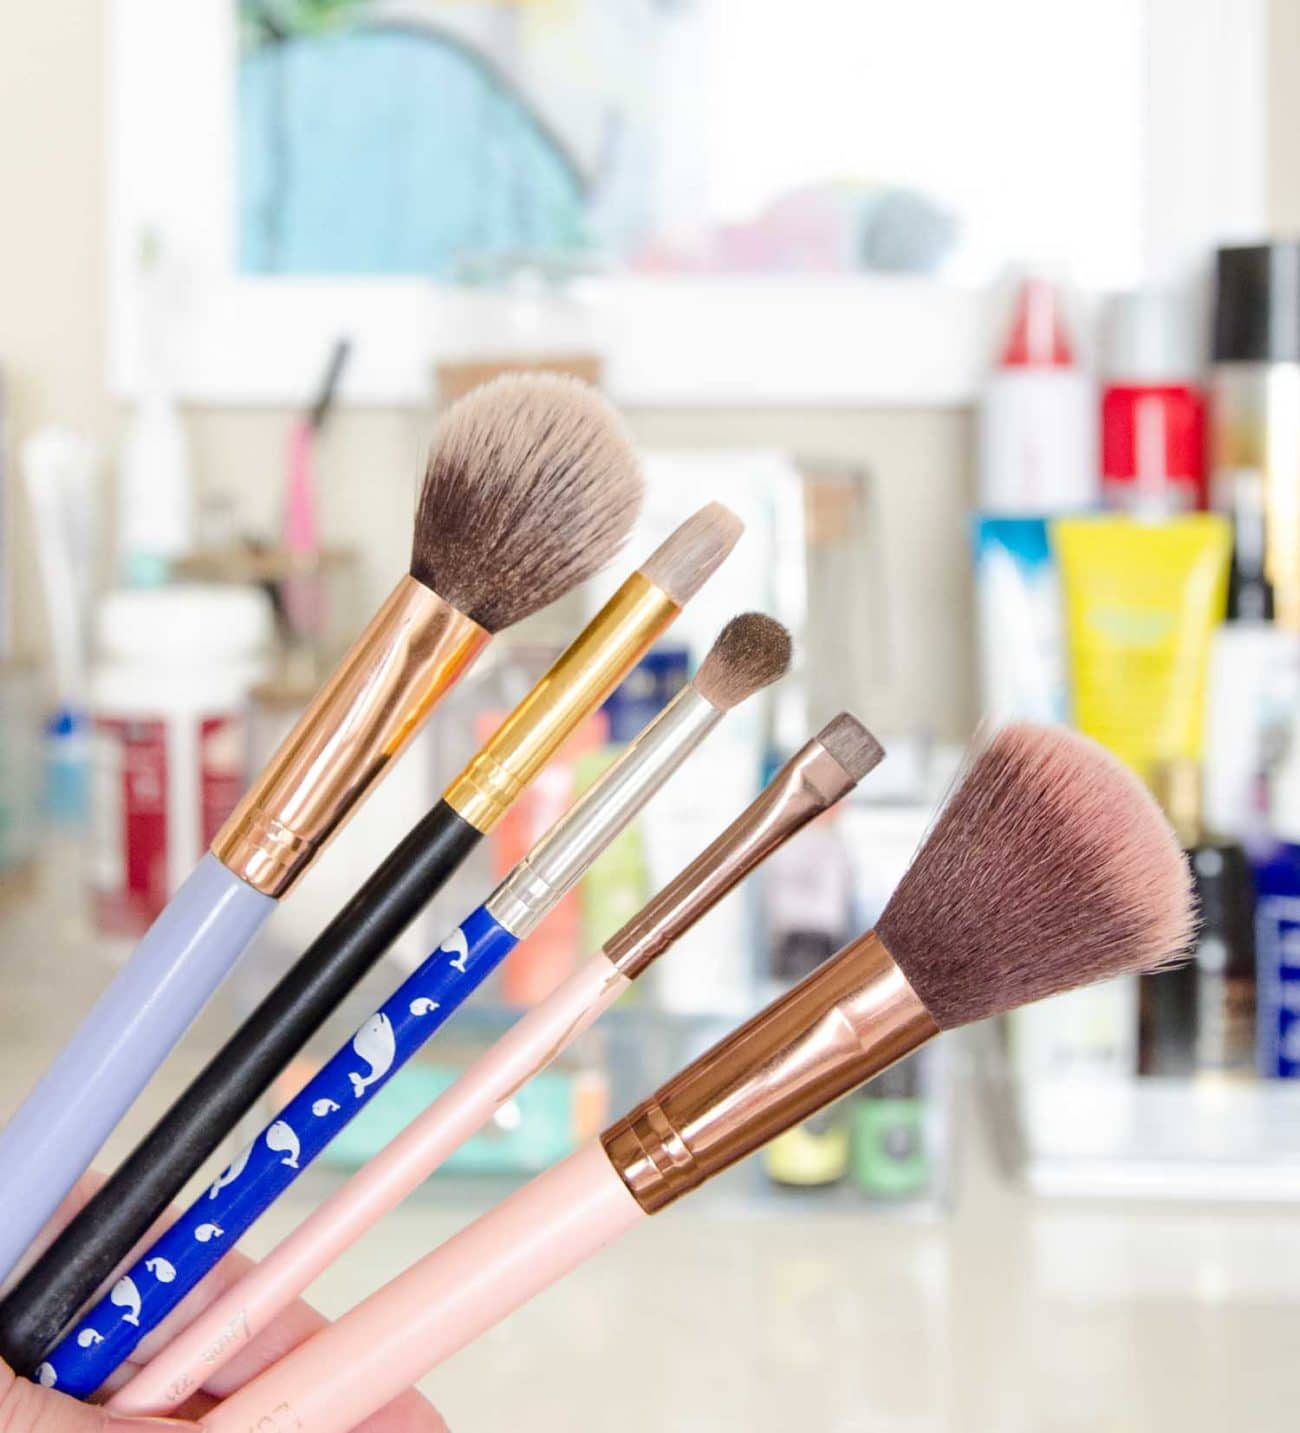 Dirty make up brushes need to be cleaned regularly